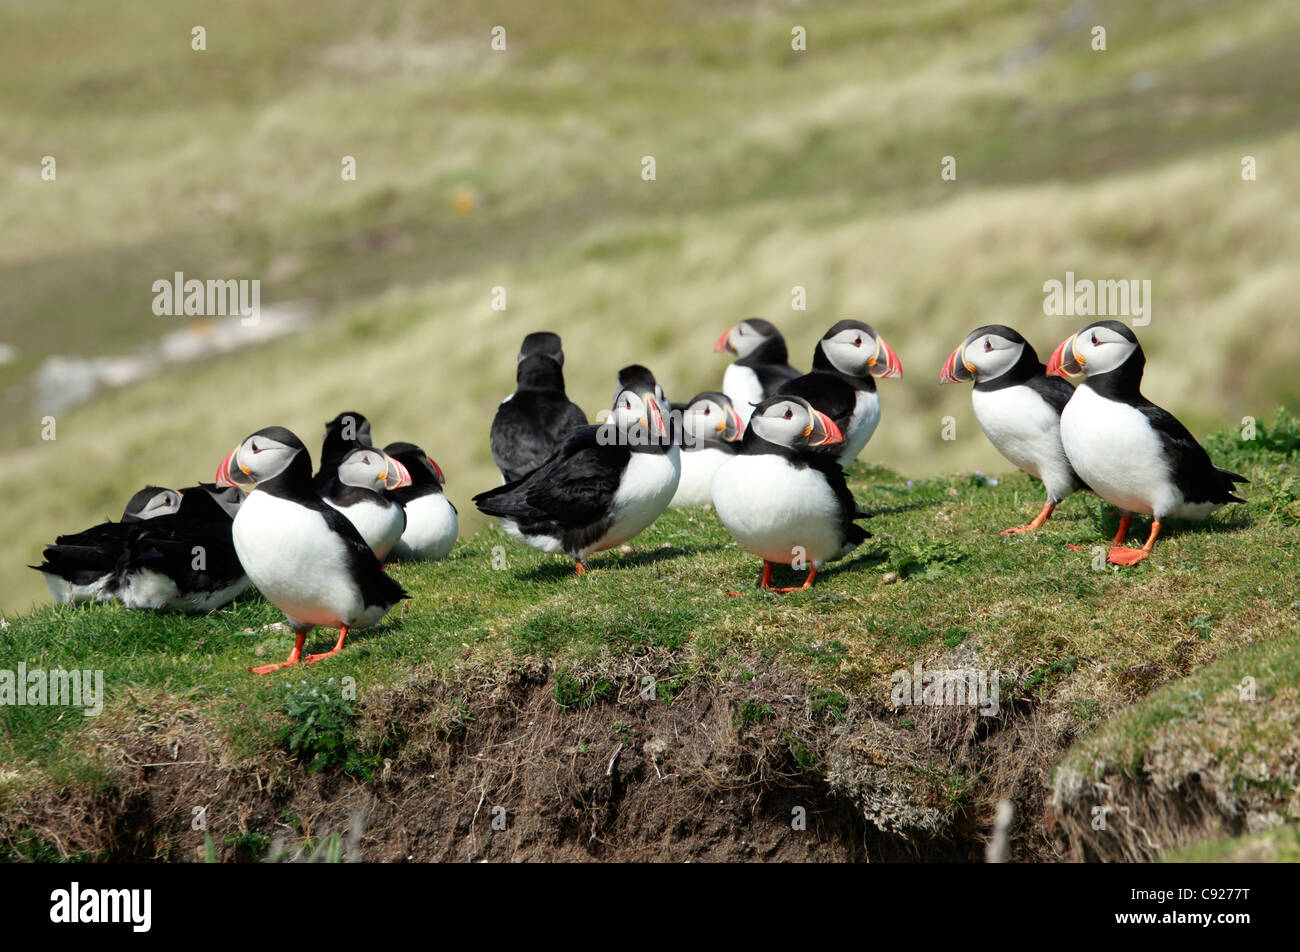 Puffins on the cliff edge overlooking sandy beach on Mingulay, one of the Bishop's Isles in the Outer Hebrides, Scotland. Stock Photo